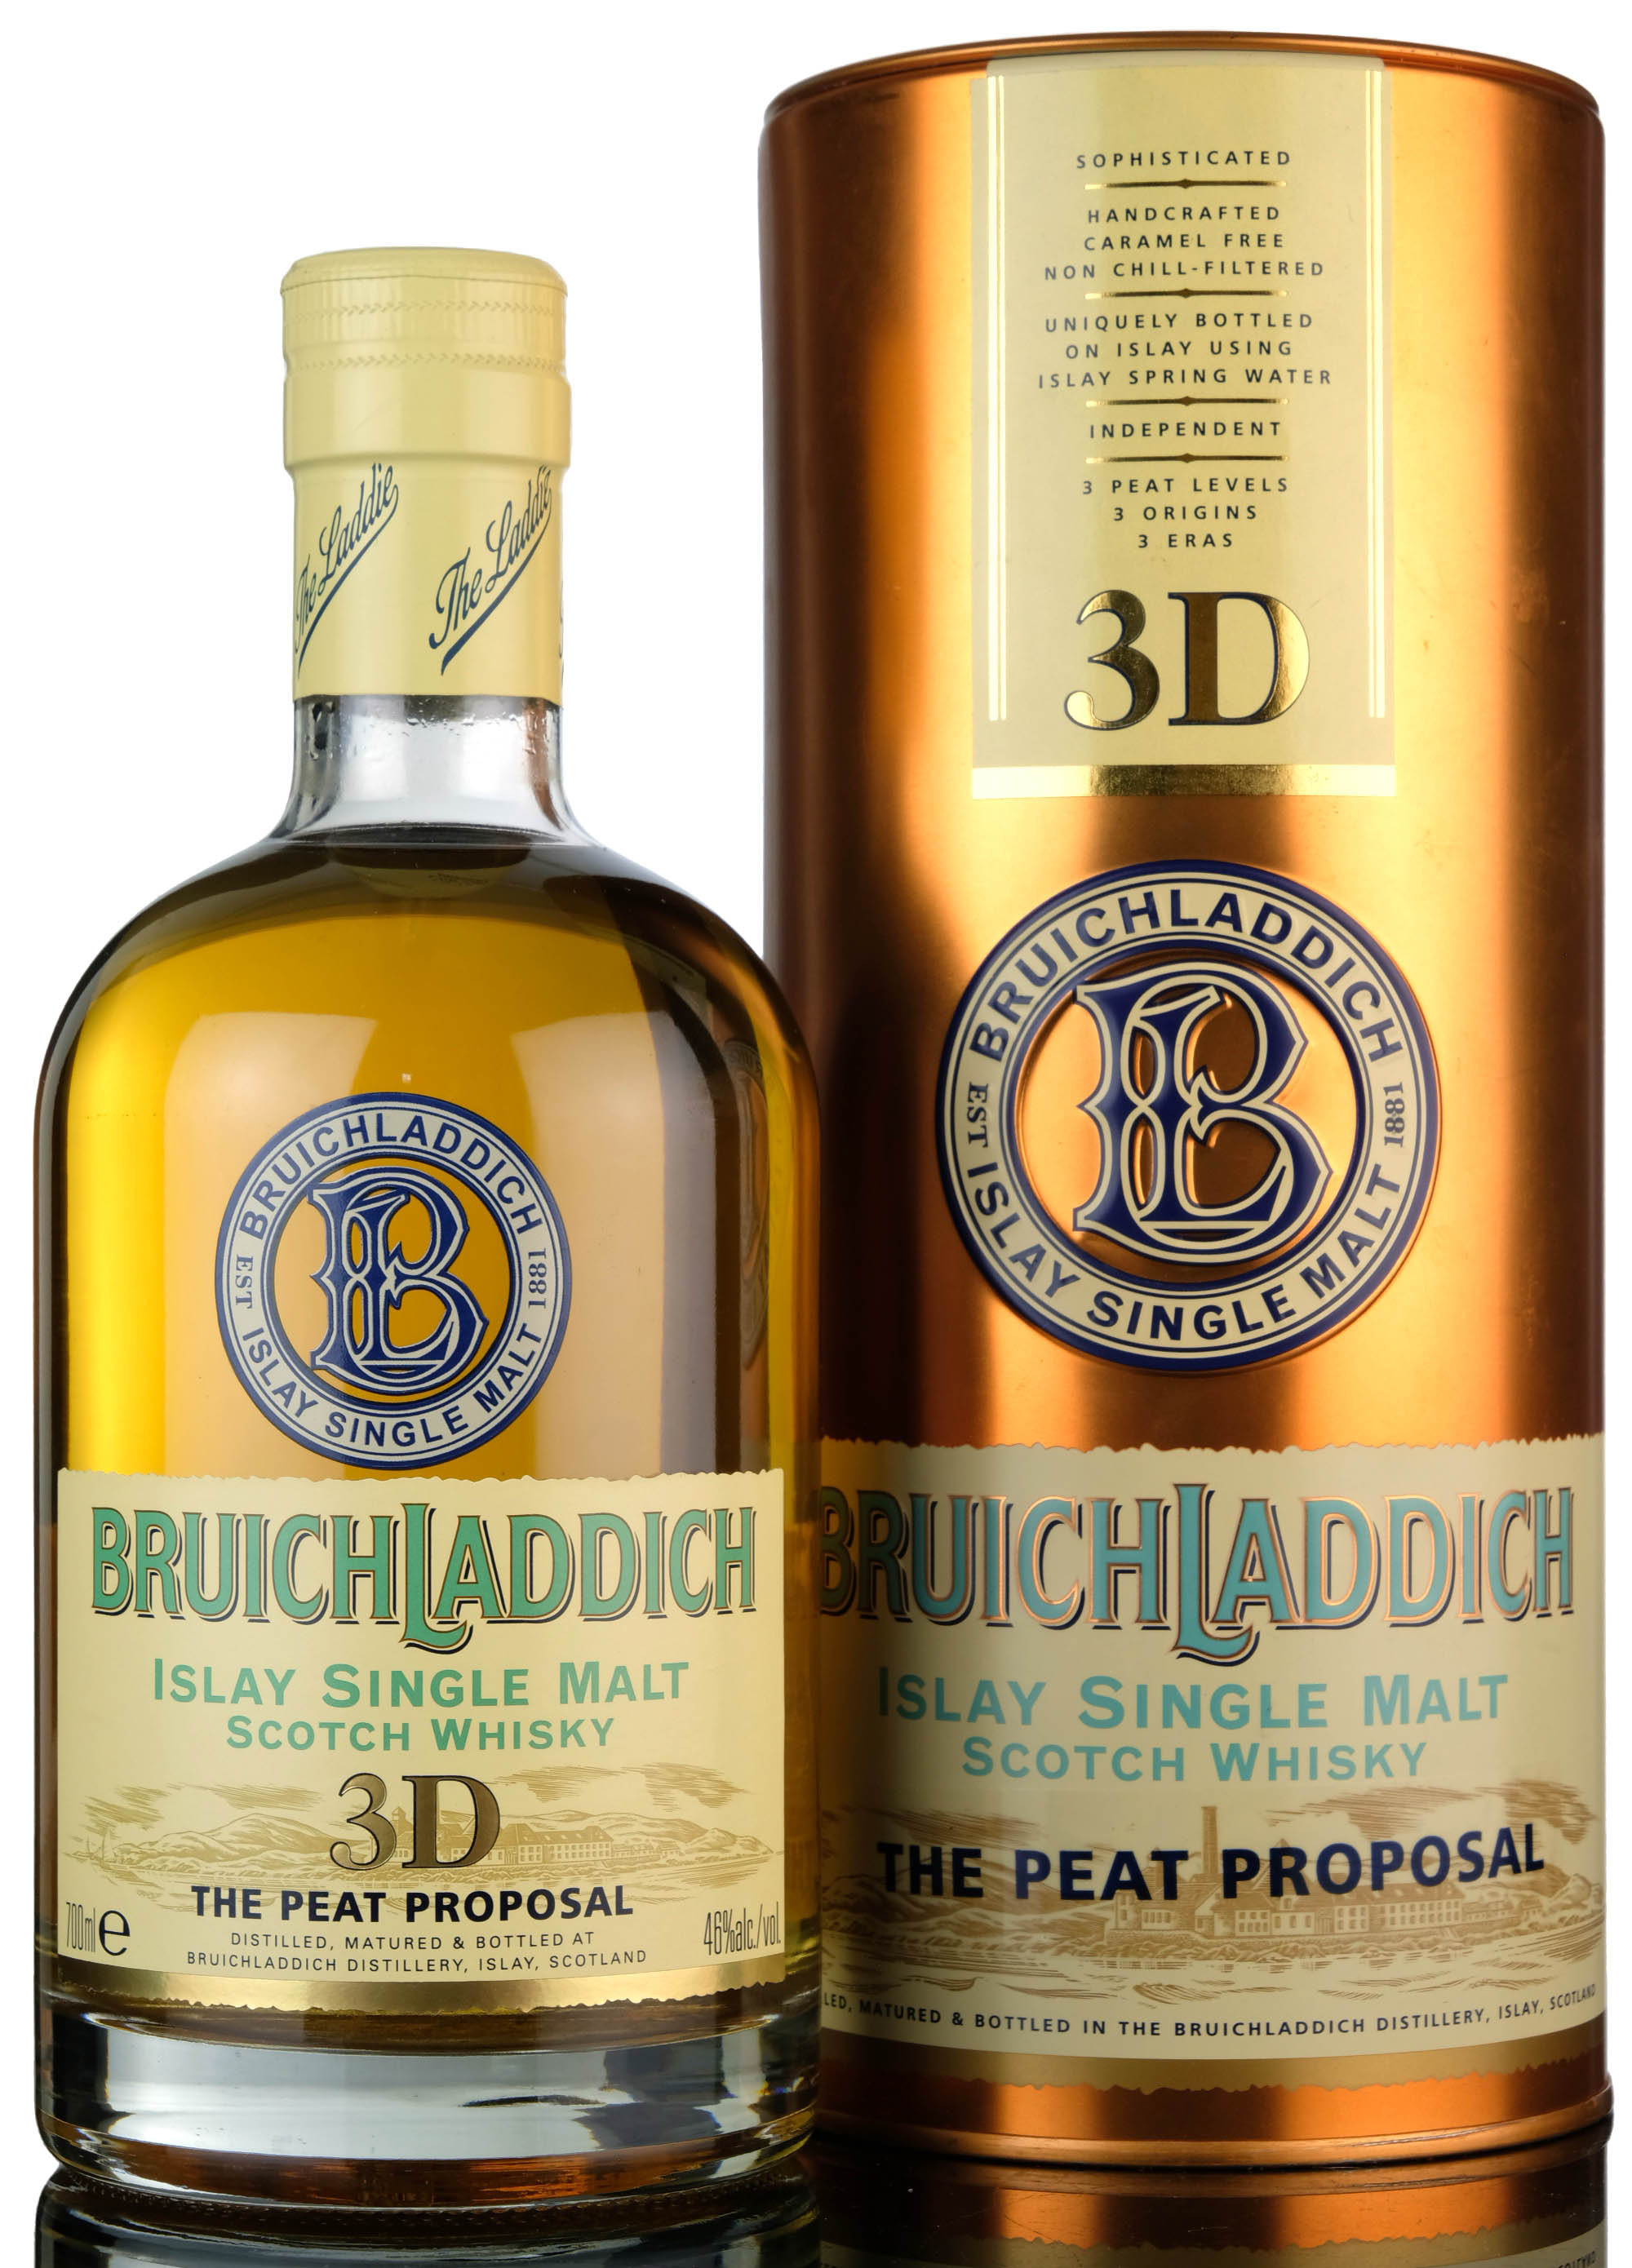 Bruichladdich 3D - The Peat Proposal - 2004 Release